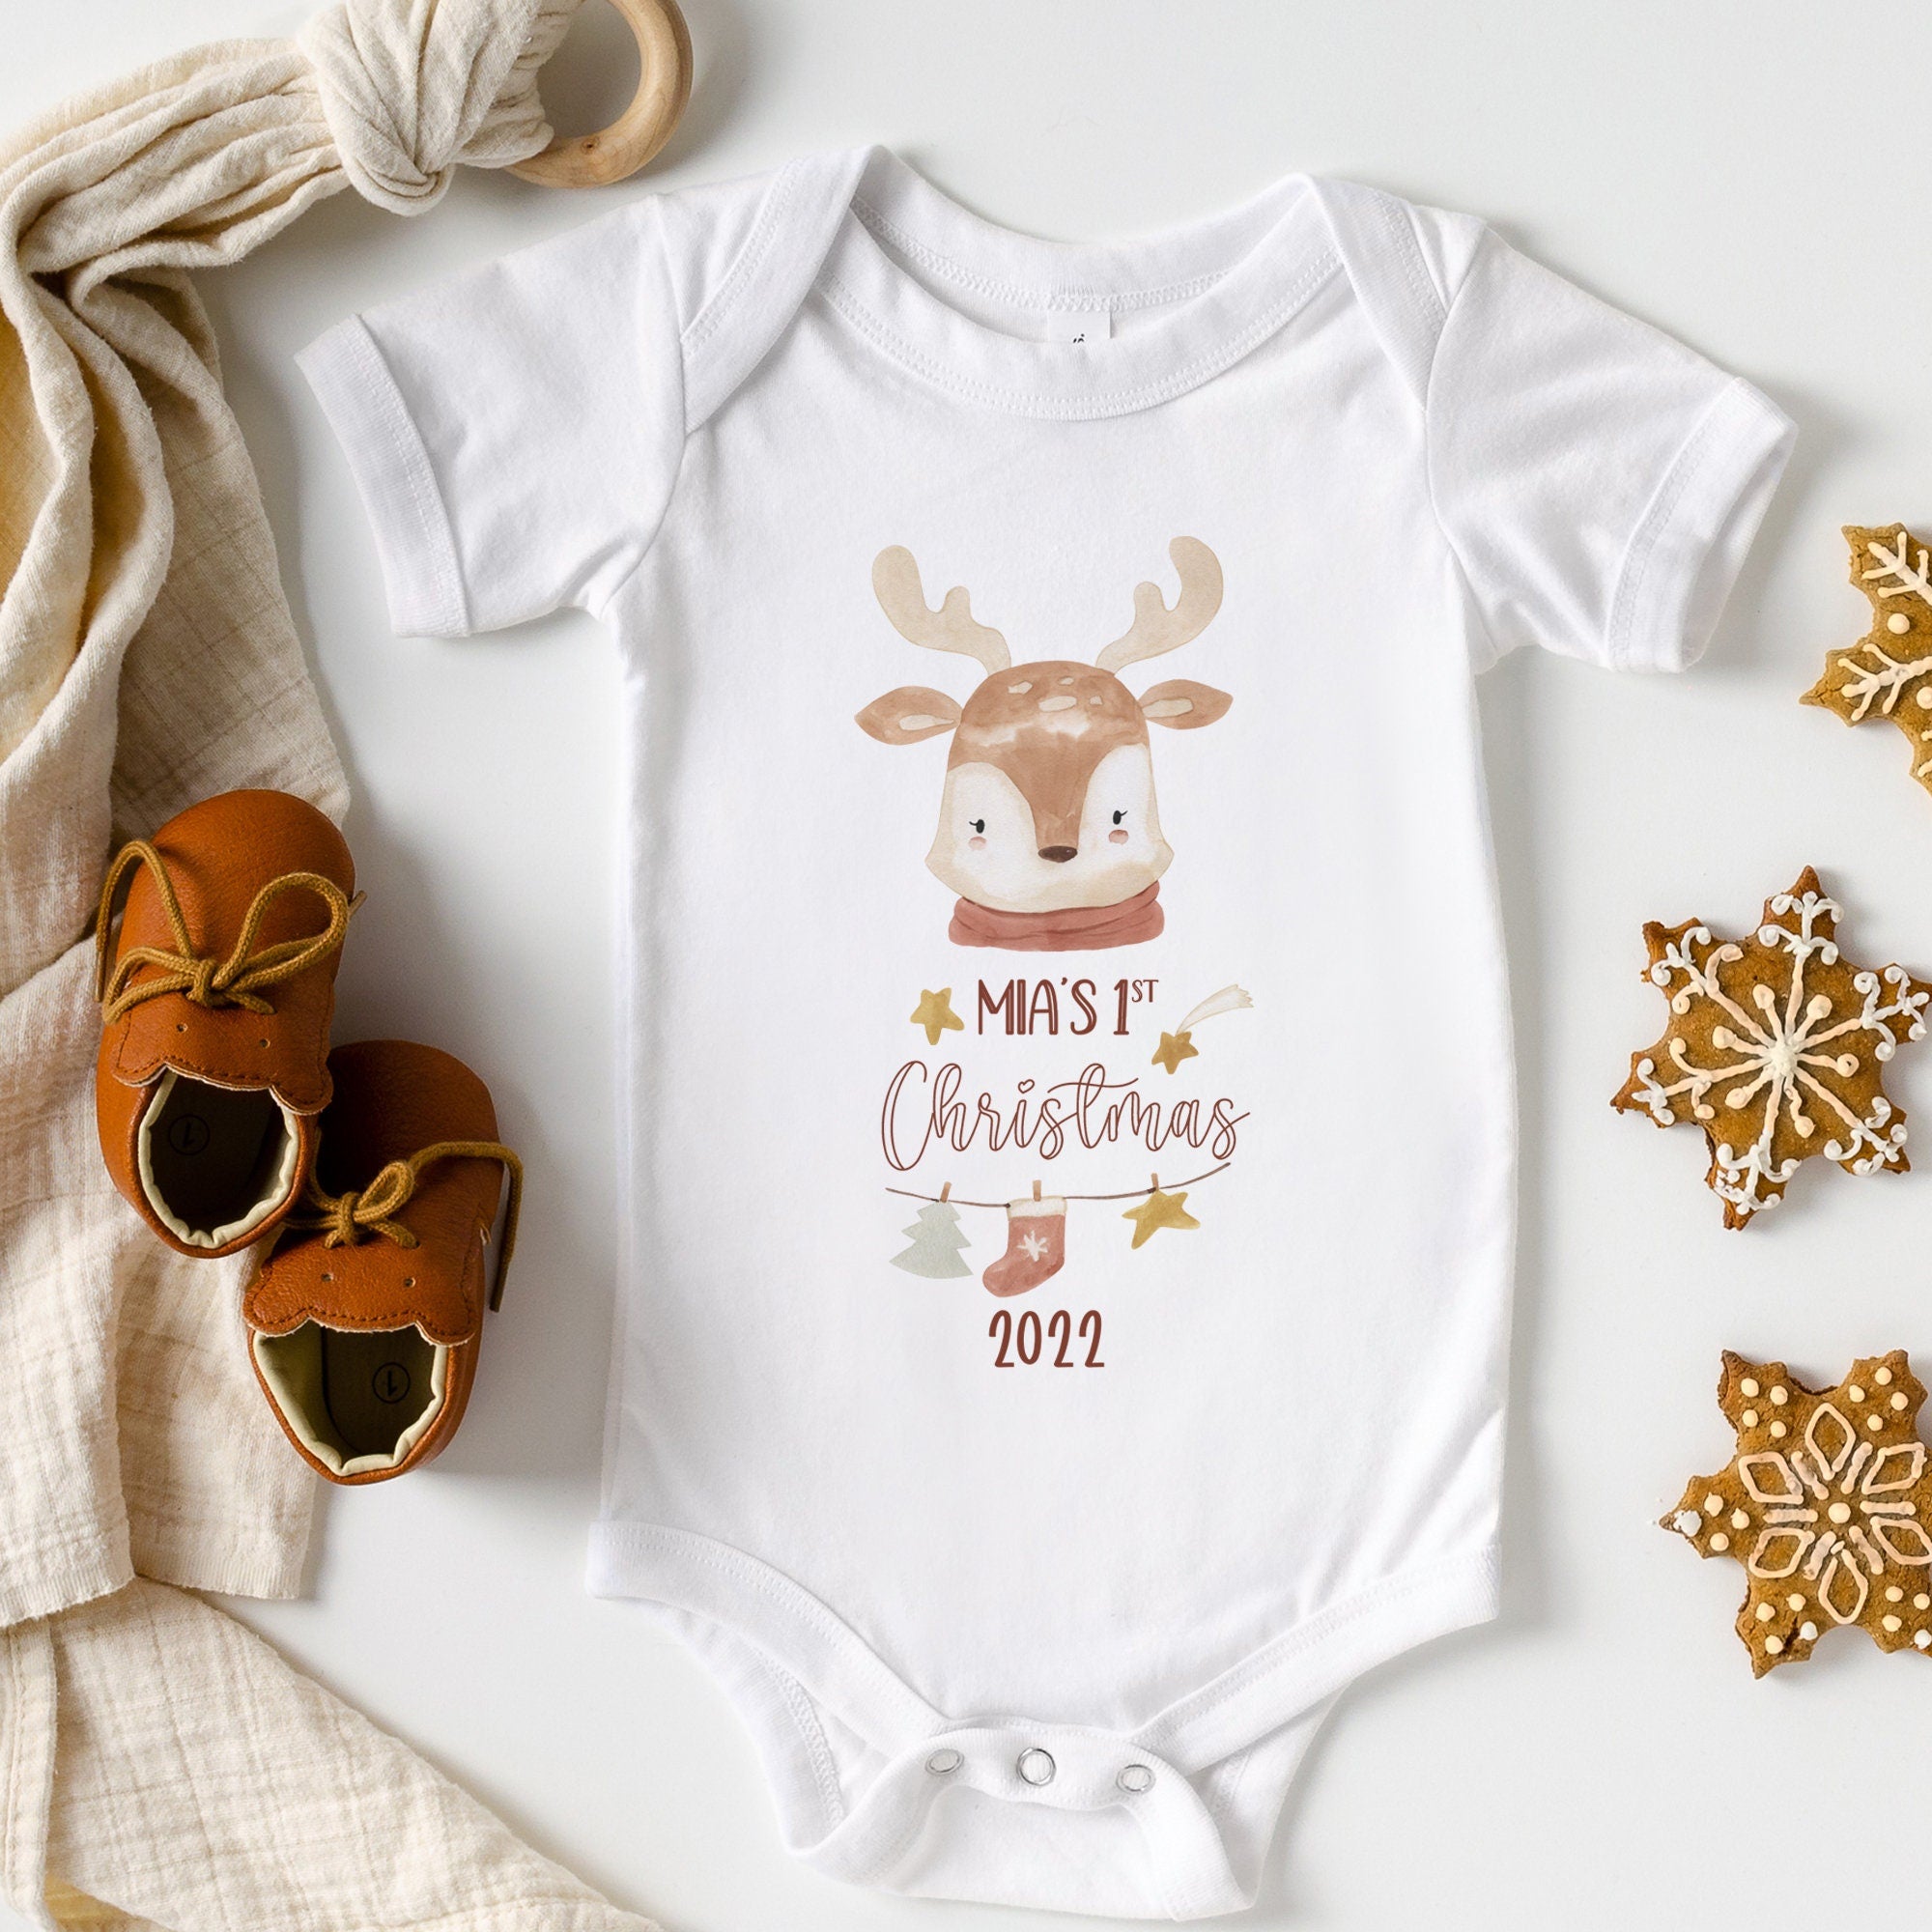 Personalised First Christmas bodysuit Eco-sustainable My 1st Xmas outfit Baby's first Christmas